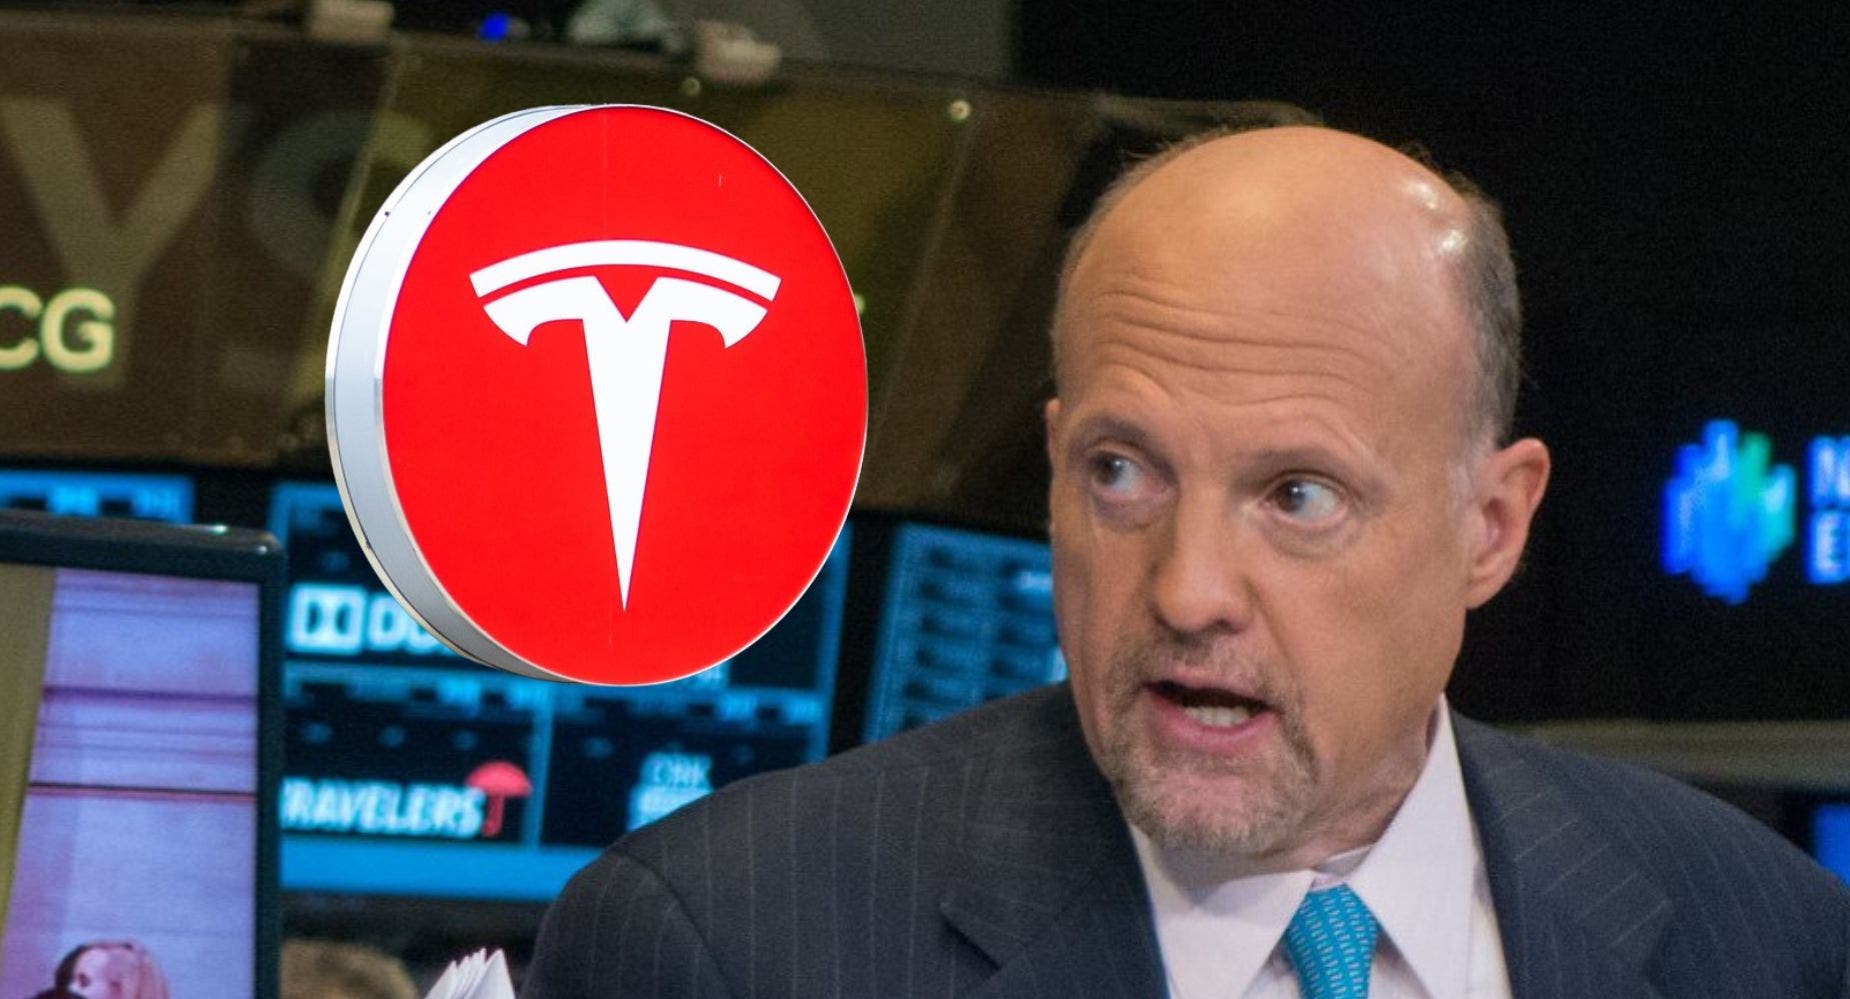 Cramer Says No To This Stock, Suggests Tesla Instead Since 'They're Also In The Lithium Business'